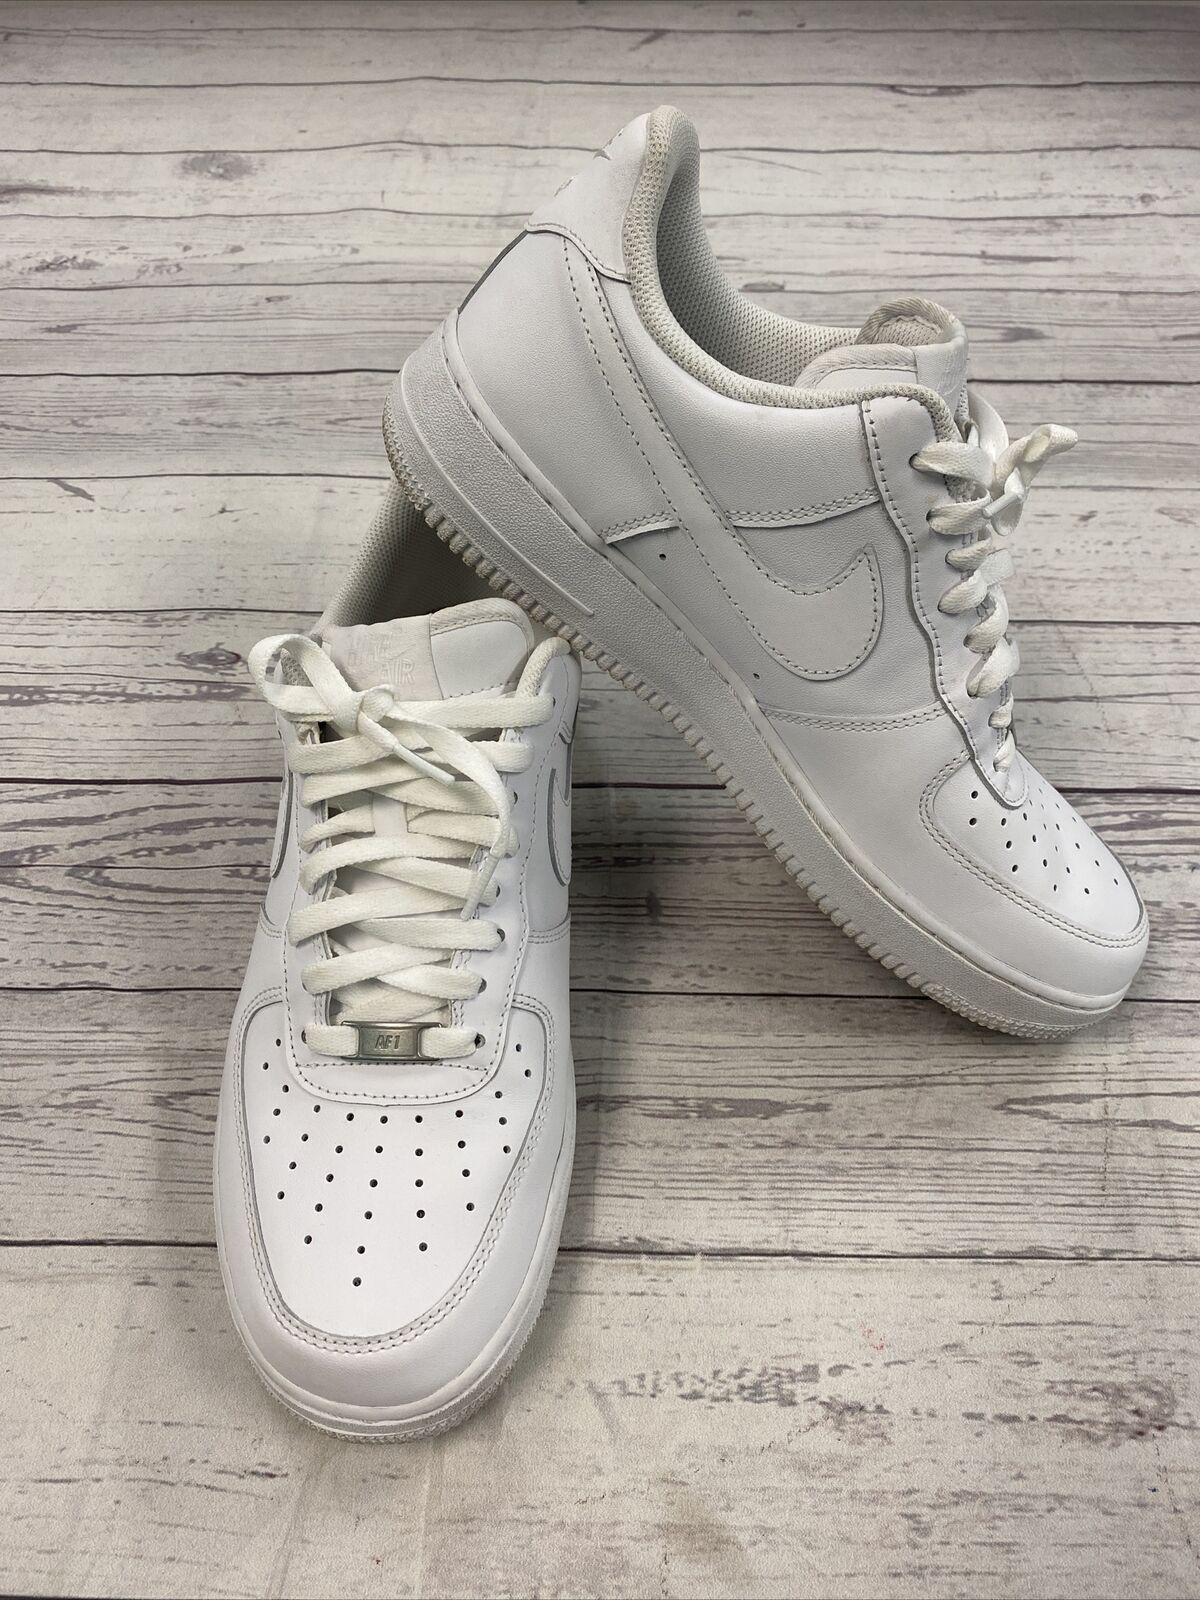 Nike 315122-111 Air Force 1 AF1 Low Triple White Mens Shoes Size 10.5